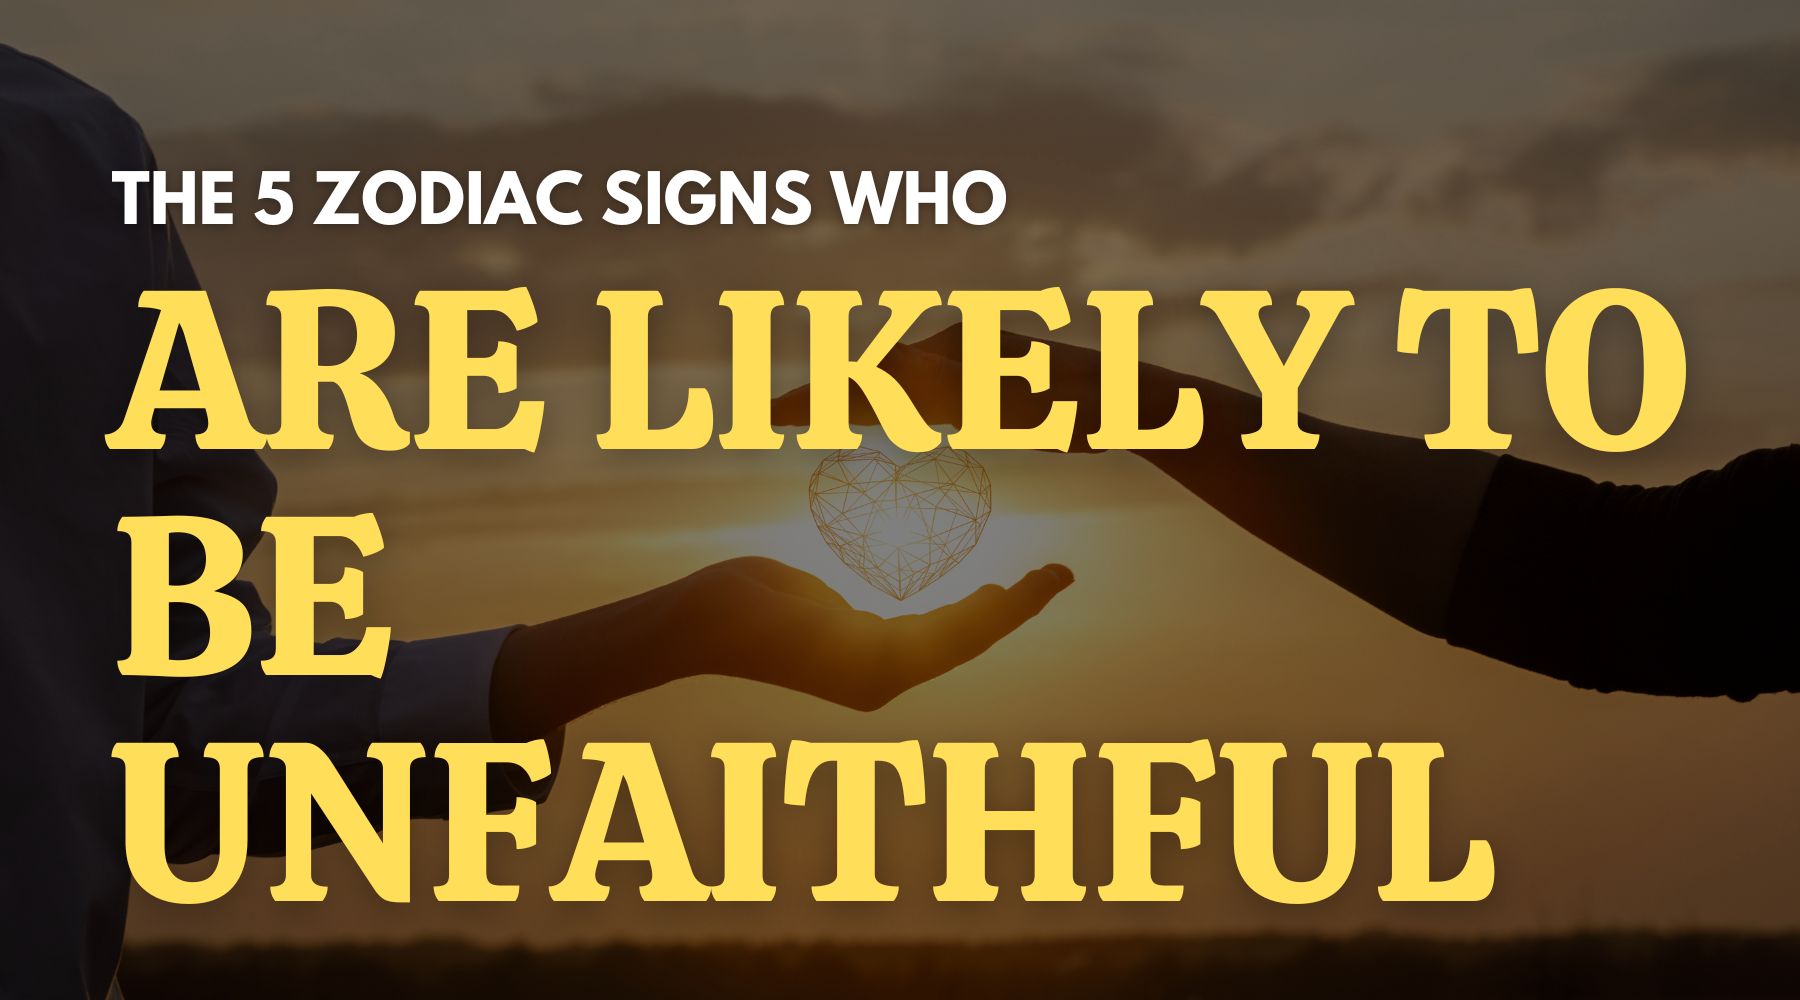 These 5 zodiac signs will likely cheat on you - Here is how to mend the situation